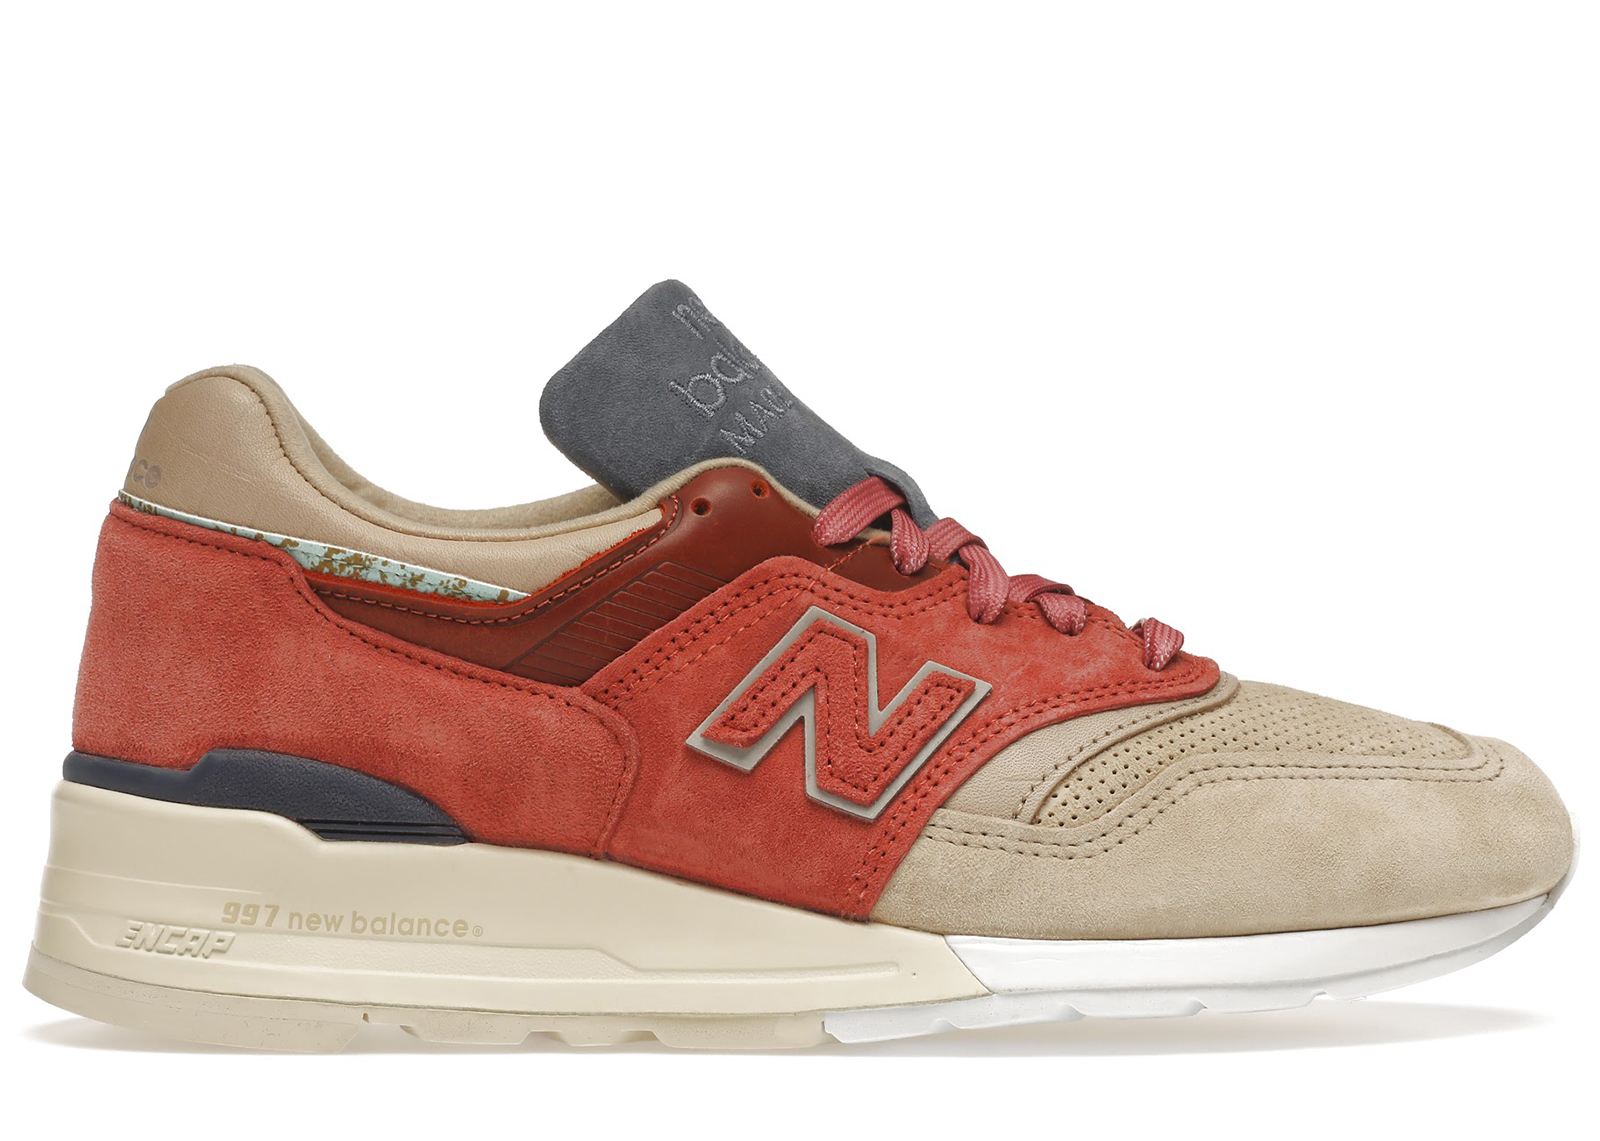 New Balance 997 Stance First of All 